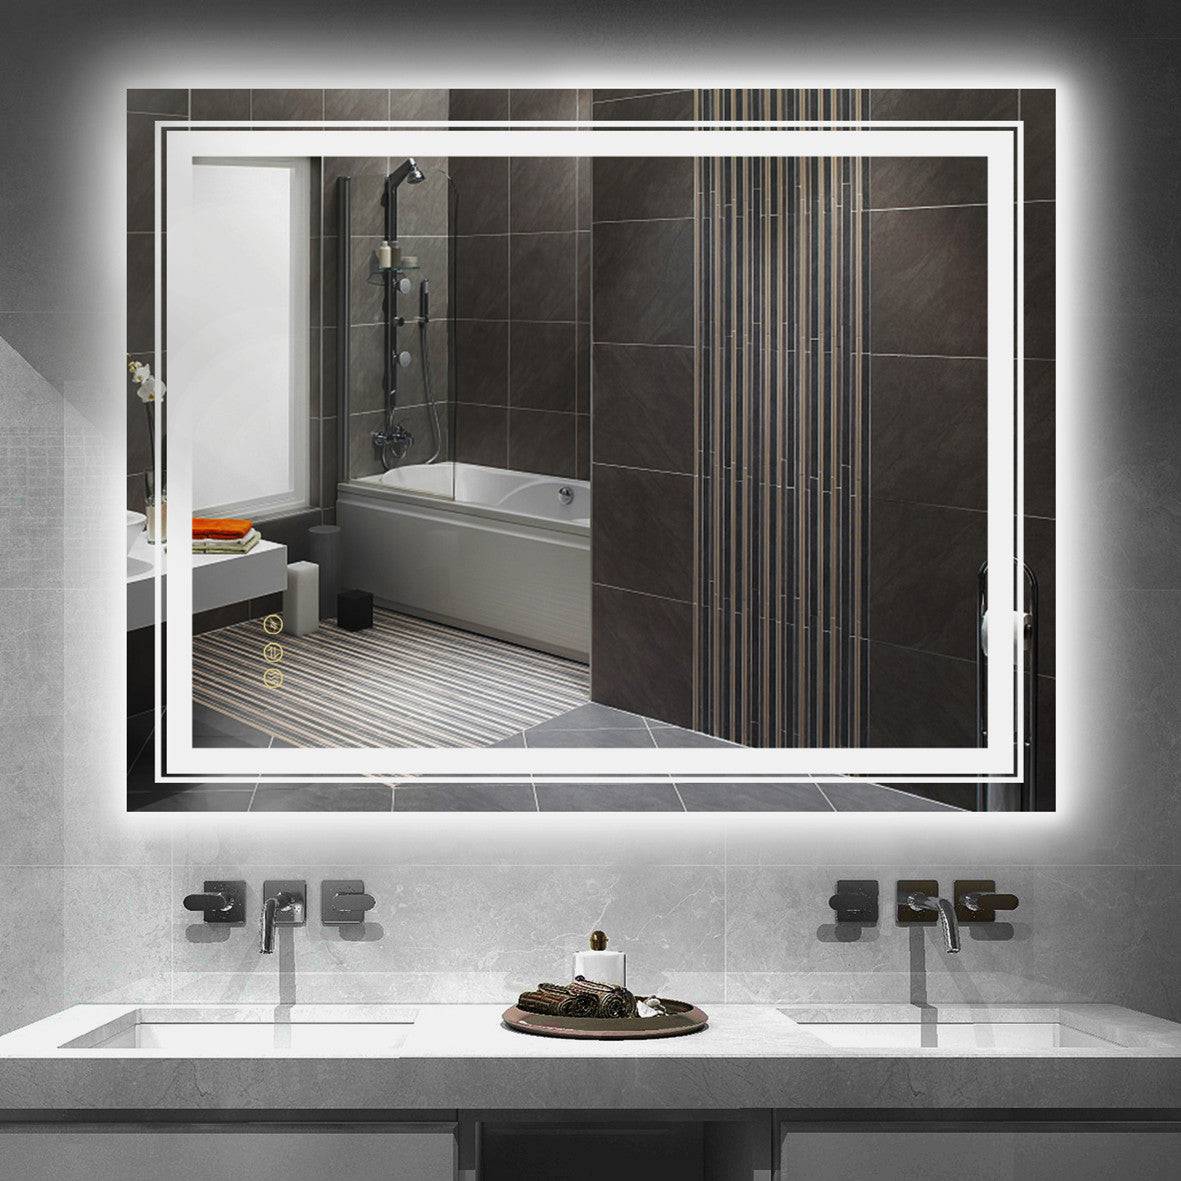 ELL Shine Series - LED Mirror with Heating Pad, Color Temperature Changing, Dimmable Lighting, and UL Certified Electronics for Bathroom | 5mm Tempered Glass, IP44 Rated, Hardwired with Plug | Vertical or Horizontal Mounting - Eco LED Lightings 